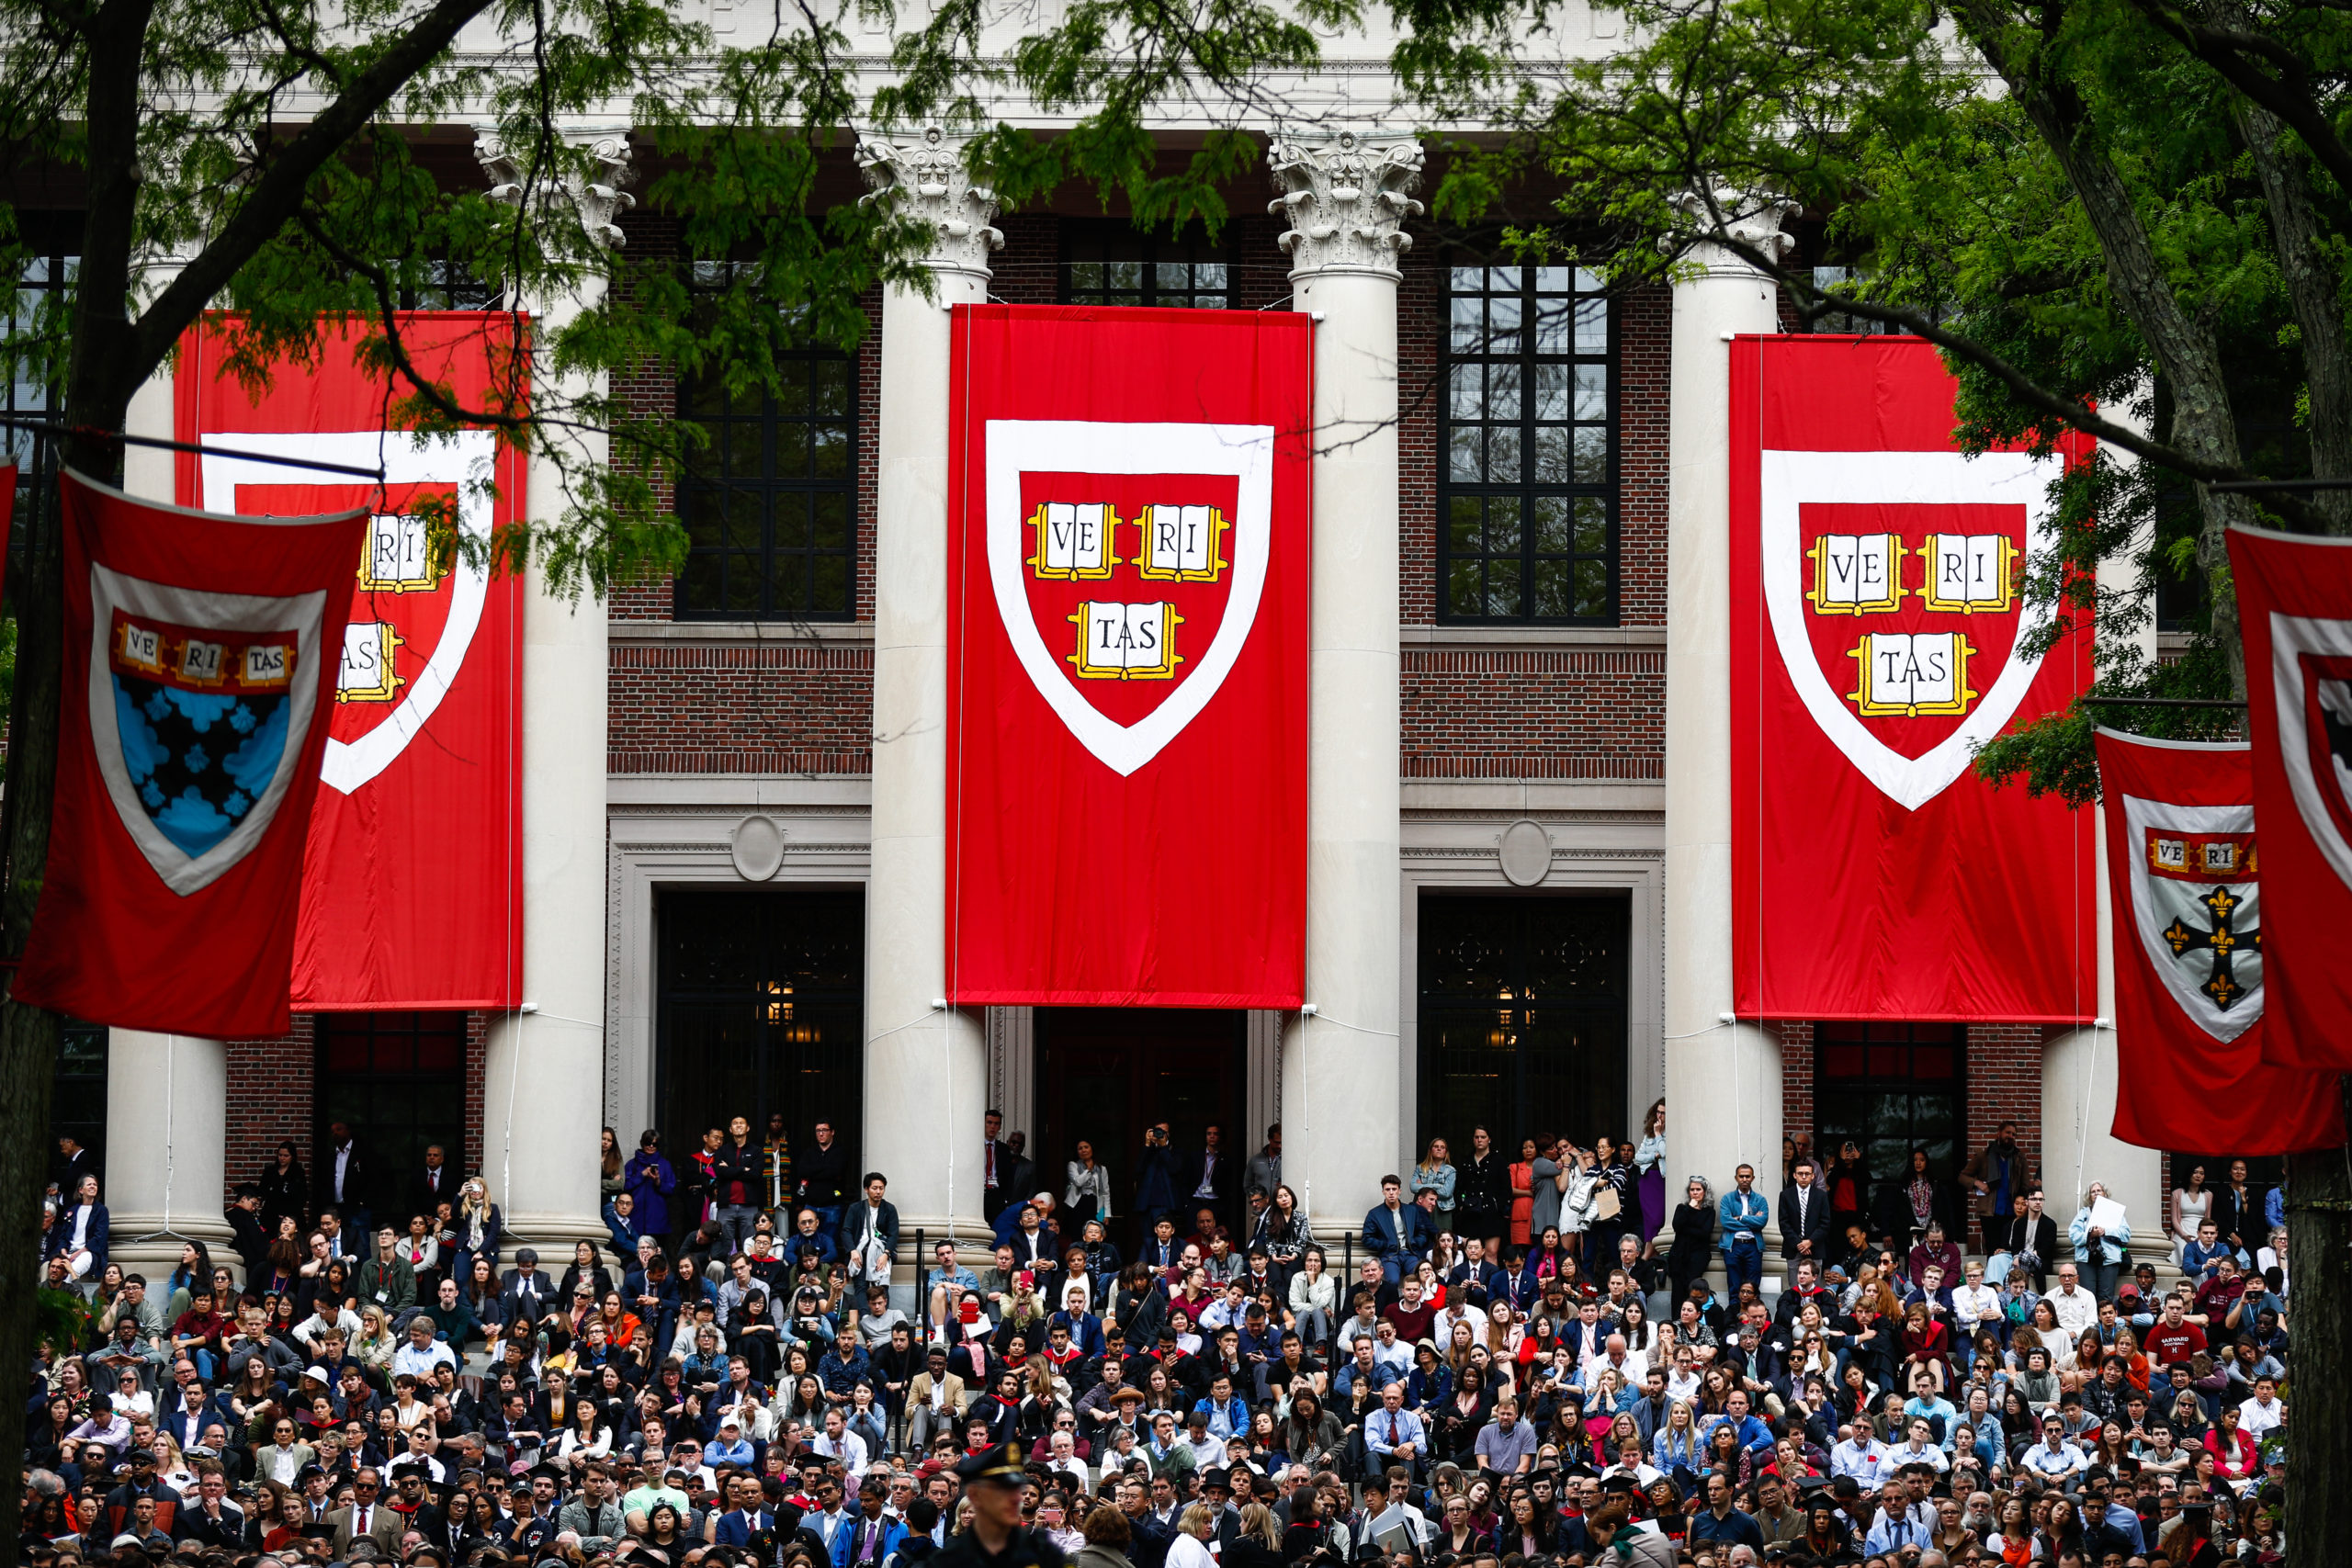 The Real Affirmative Action Research Finds 43 of Harvard Admissions